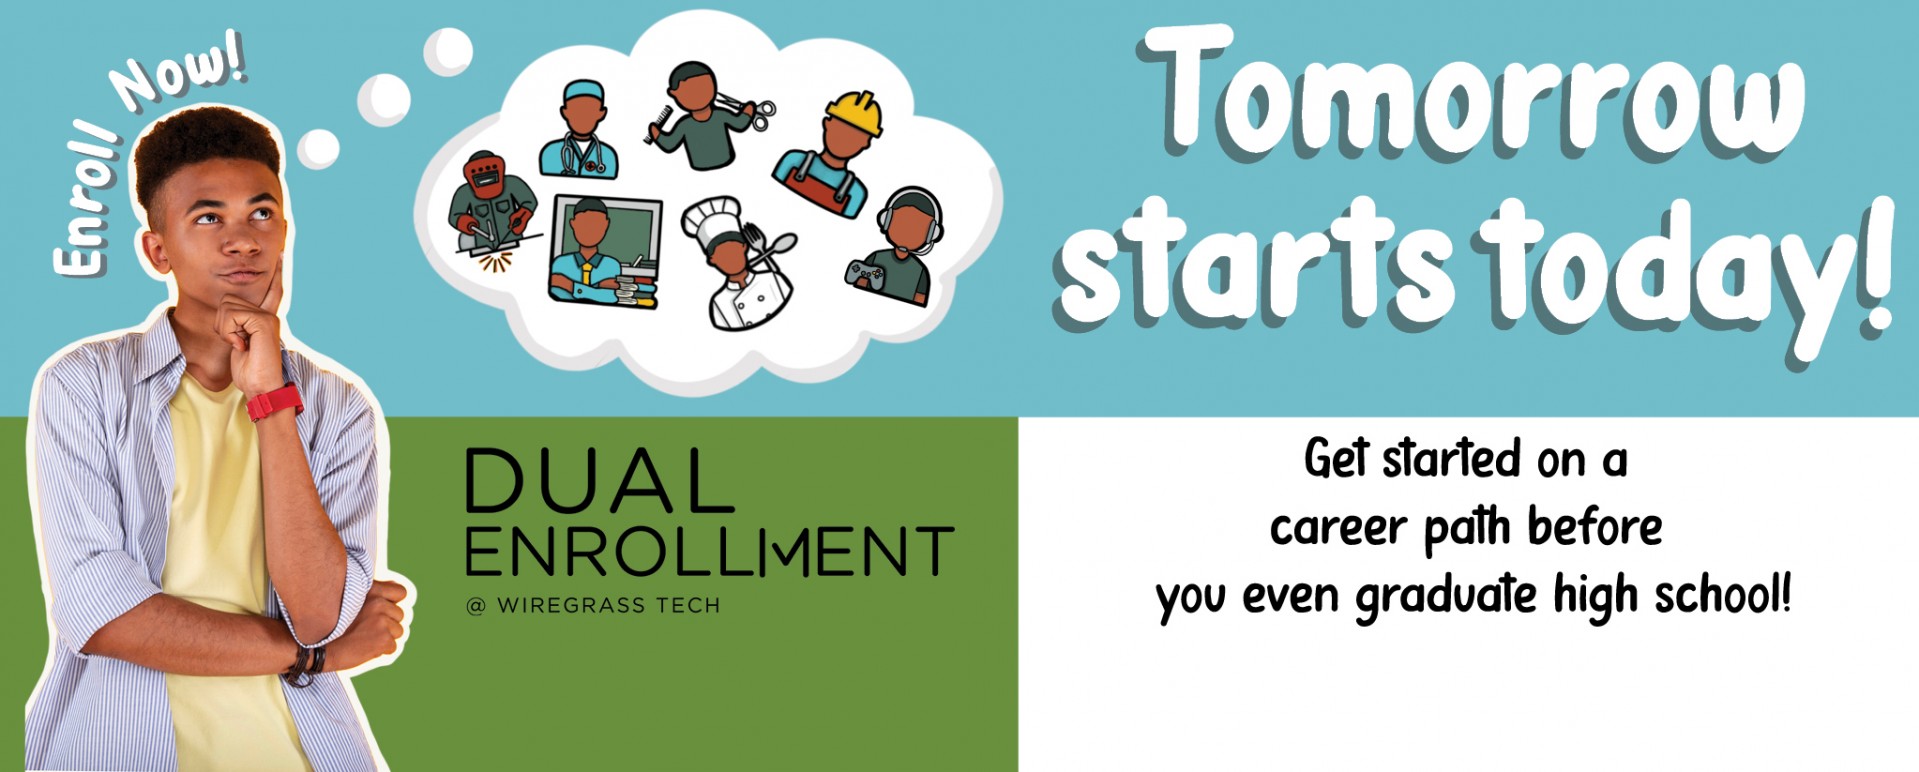 Apply as a dual enrollment student at Wiregrass today to get a head start on college! 